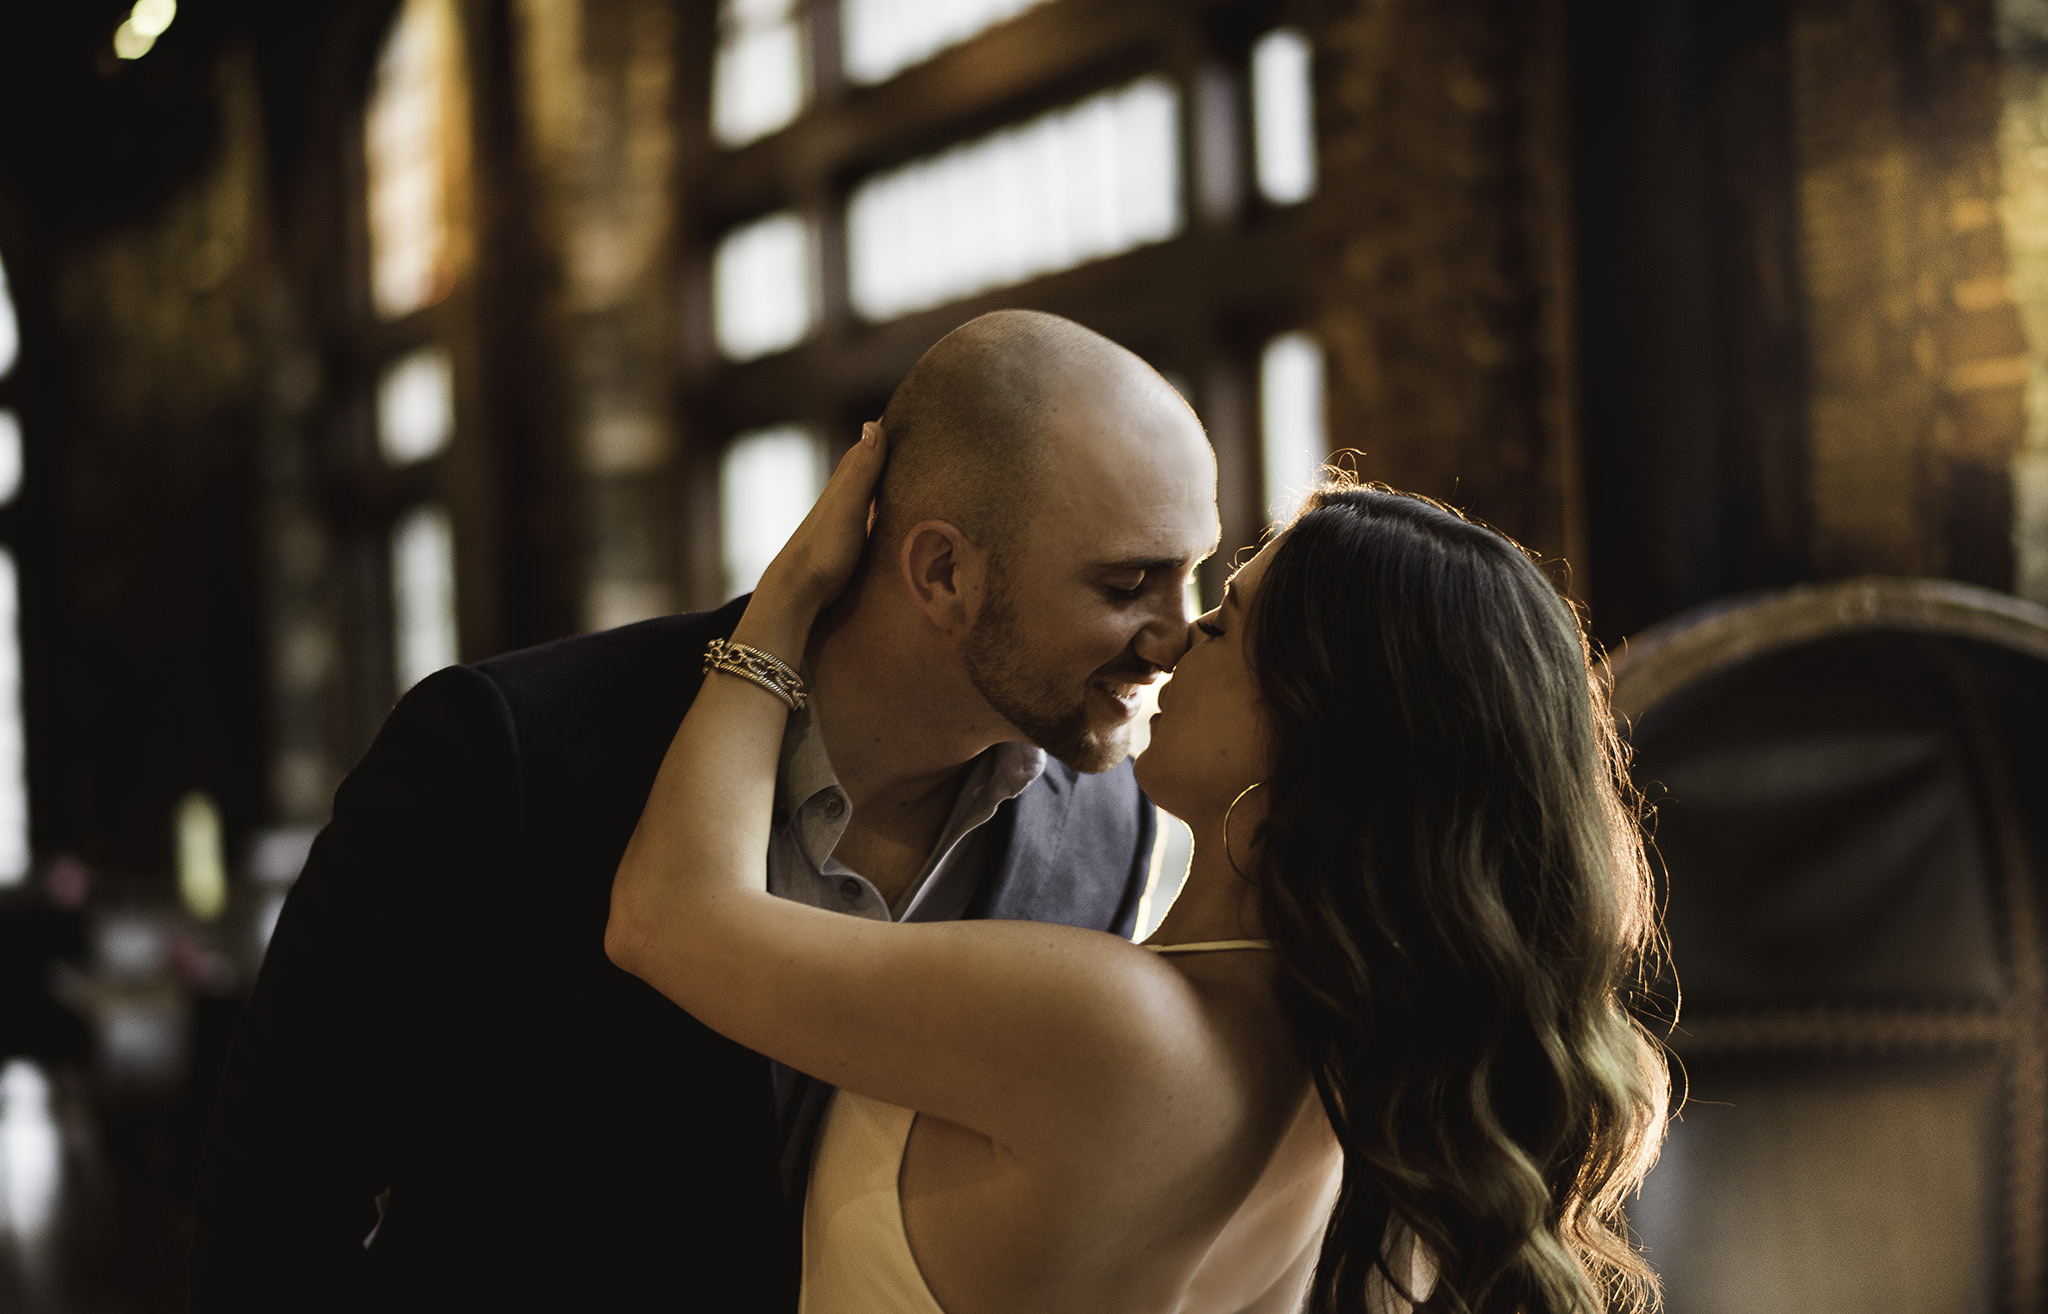 Lawless-Spirits-kitchen-crystal-ballroom-rice-initmate-historic-lifestyle-engagement-photography-session-downtown-houston